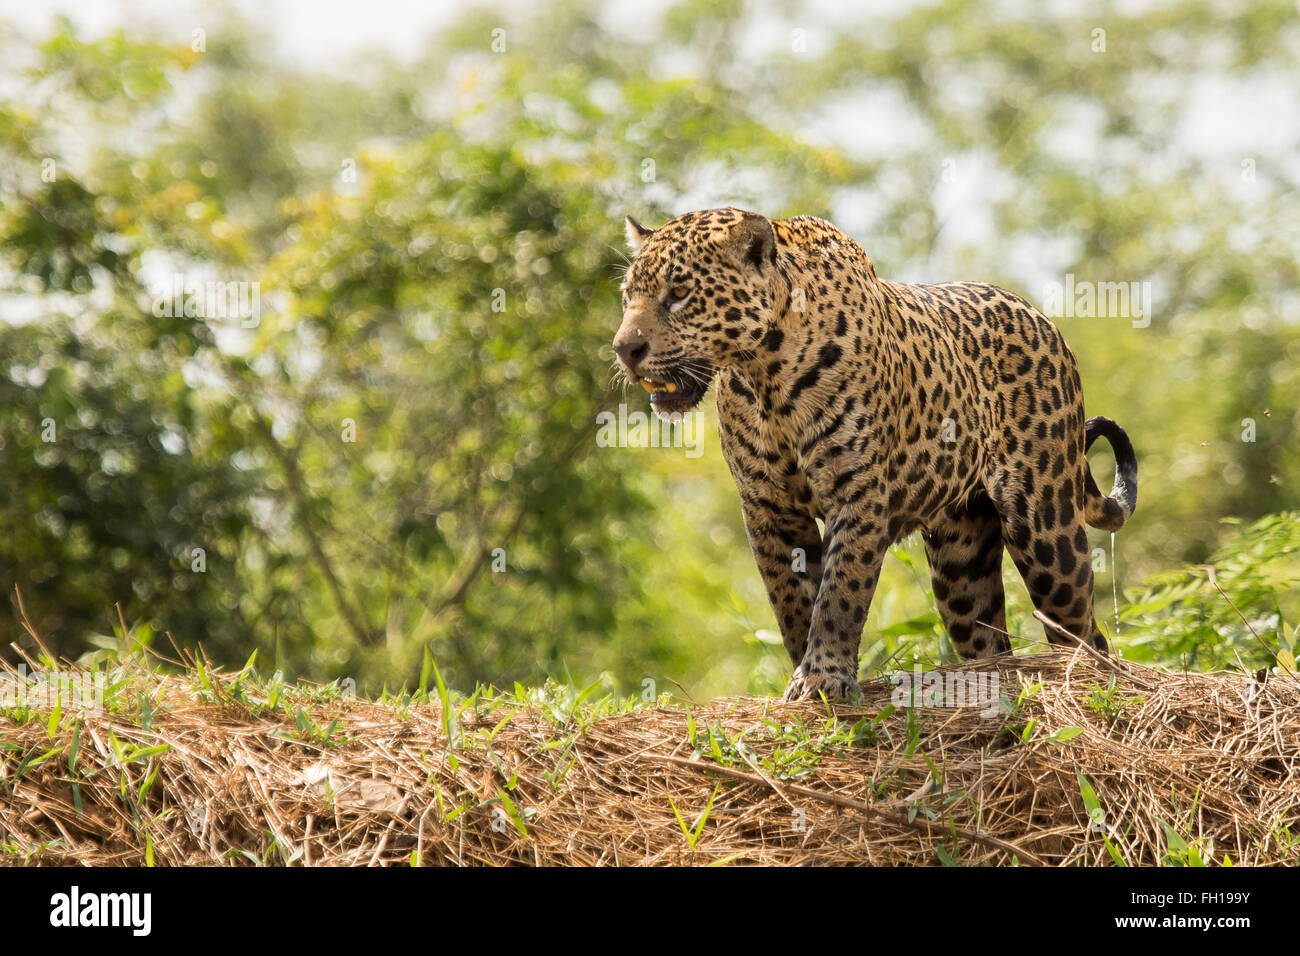 A wild sub-adult female jaguar atop a bank of the Cuiaba river in the Pantanal, Brazil. Stock Photo